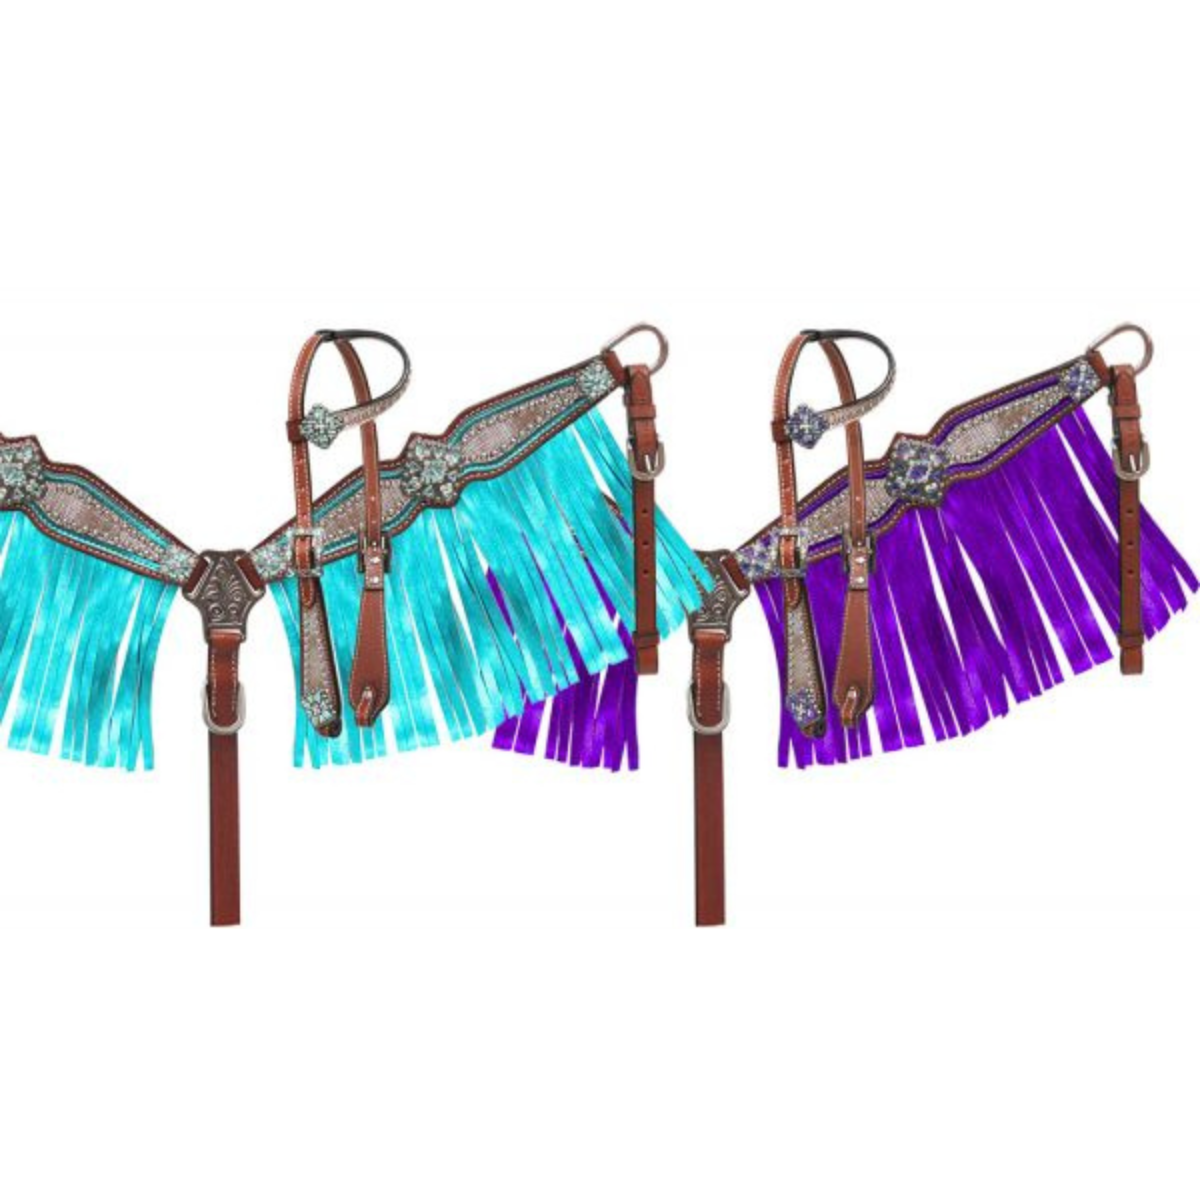 Pony Size Headstall and breast collar set 